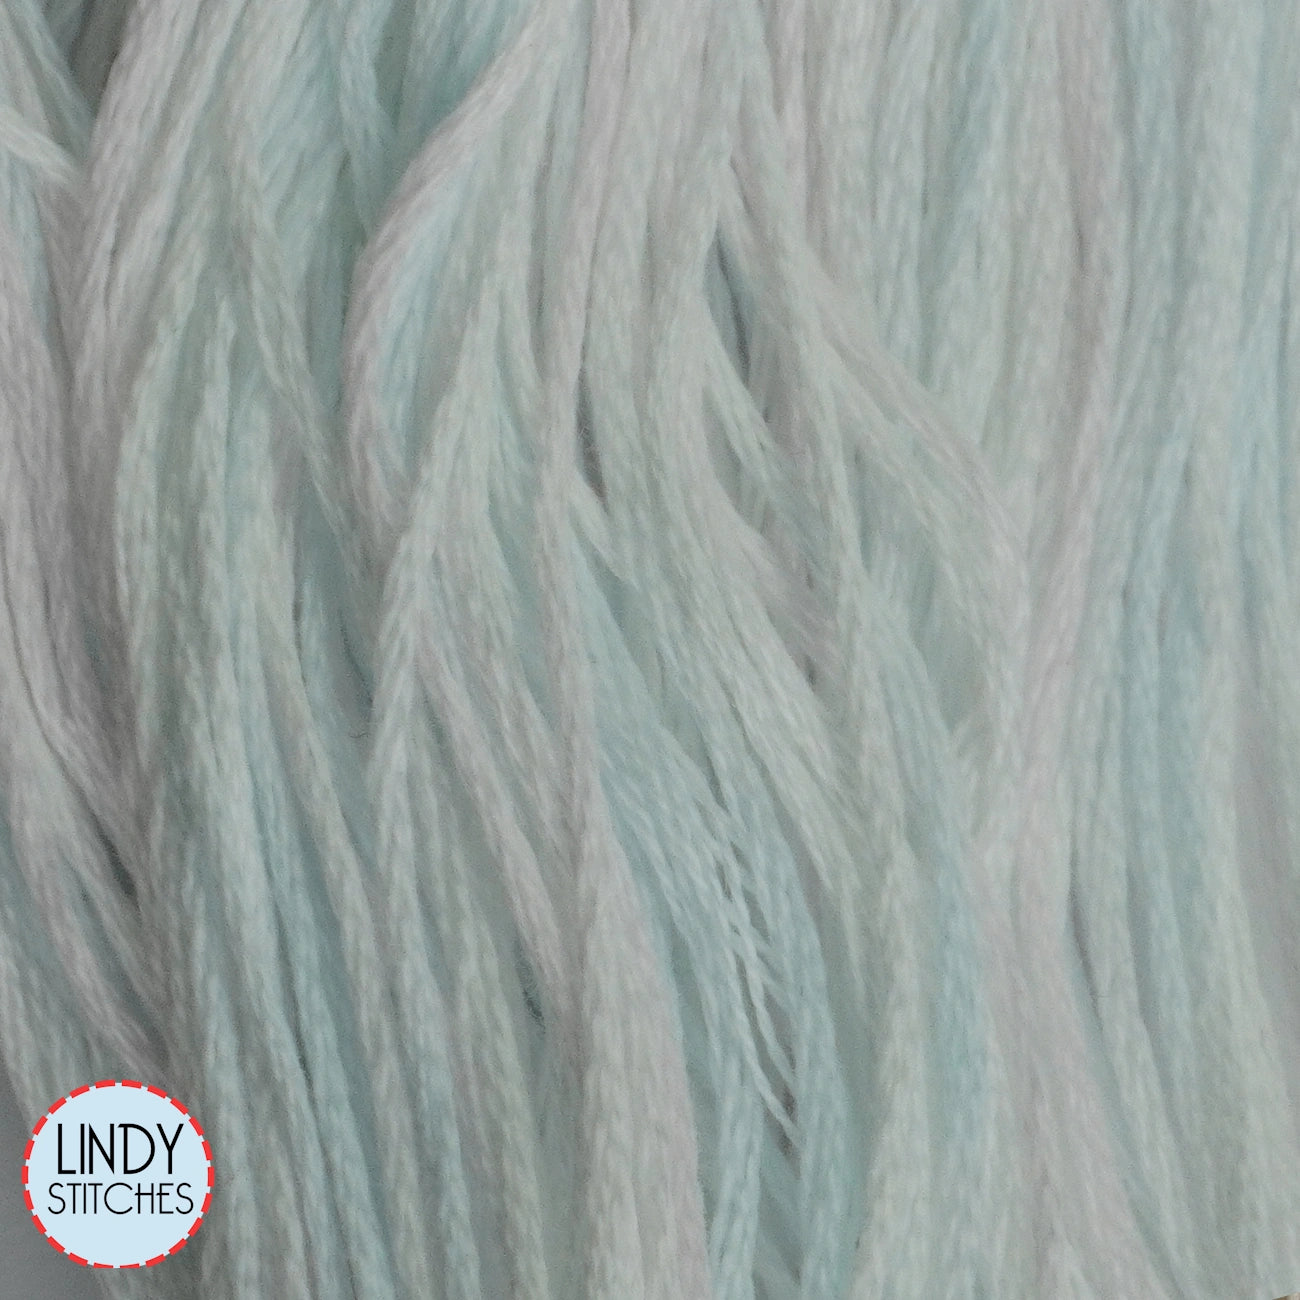 Snowflake Weeks Dye Works Floss Hand Dyed Cotton Skein 4125